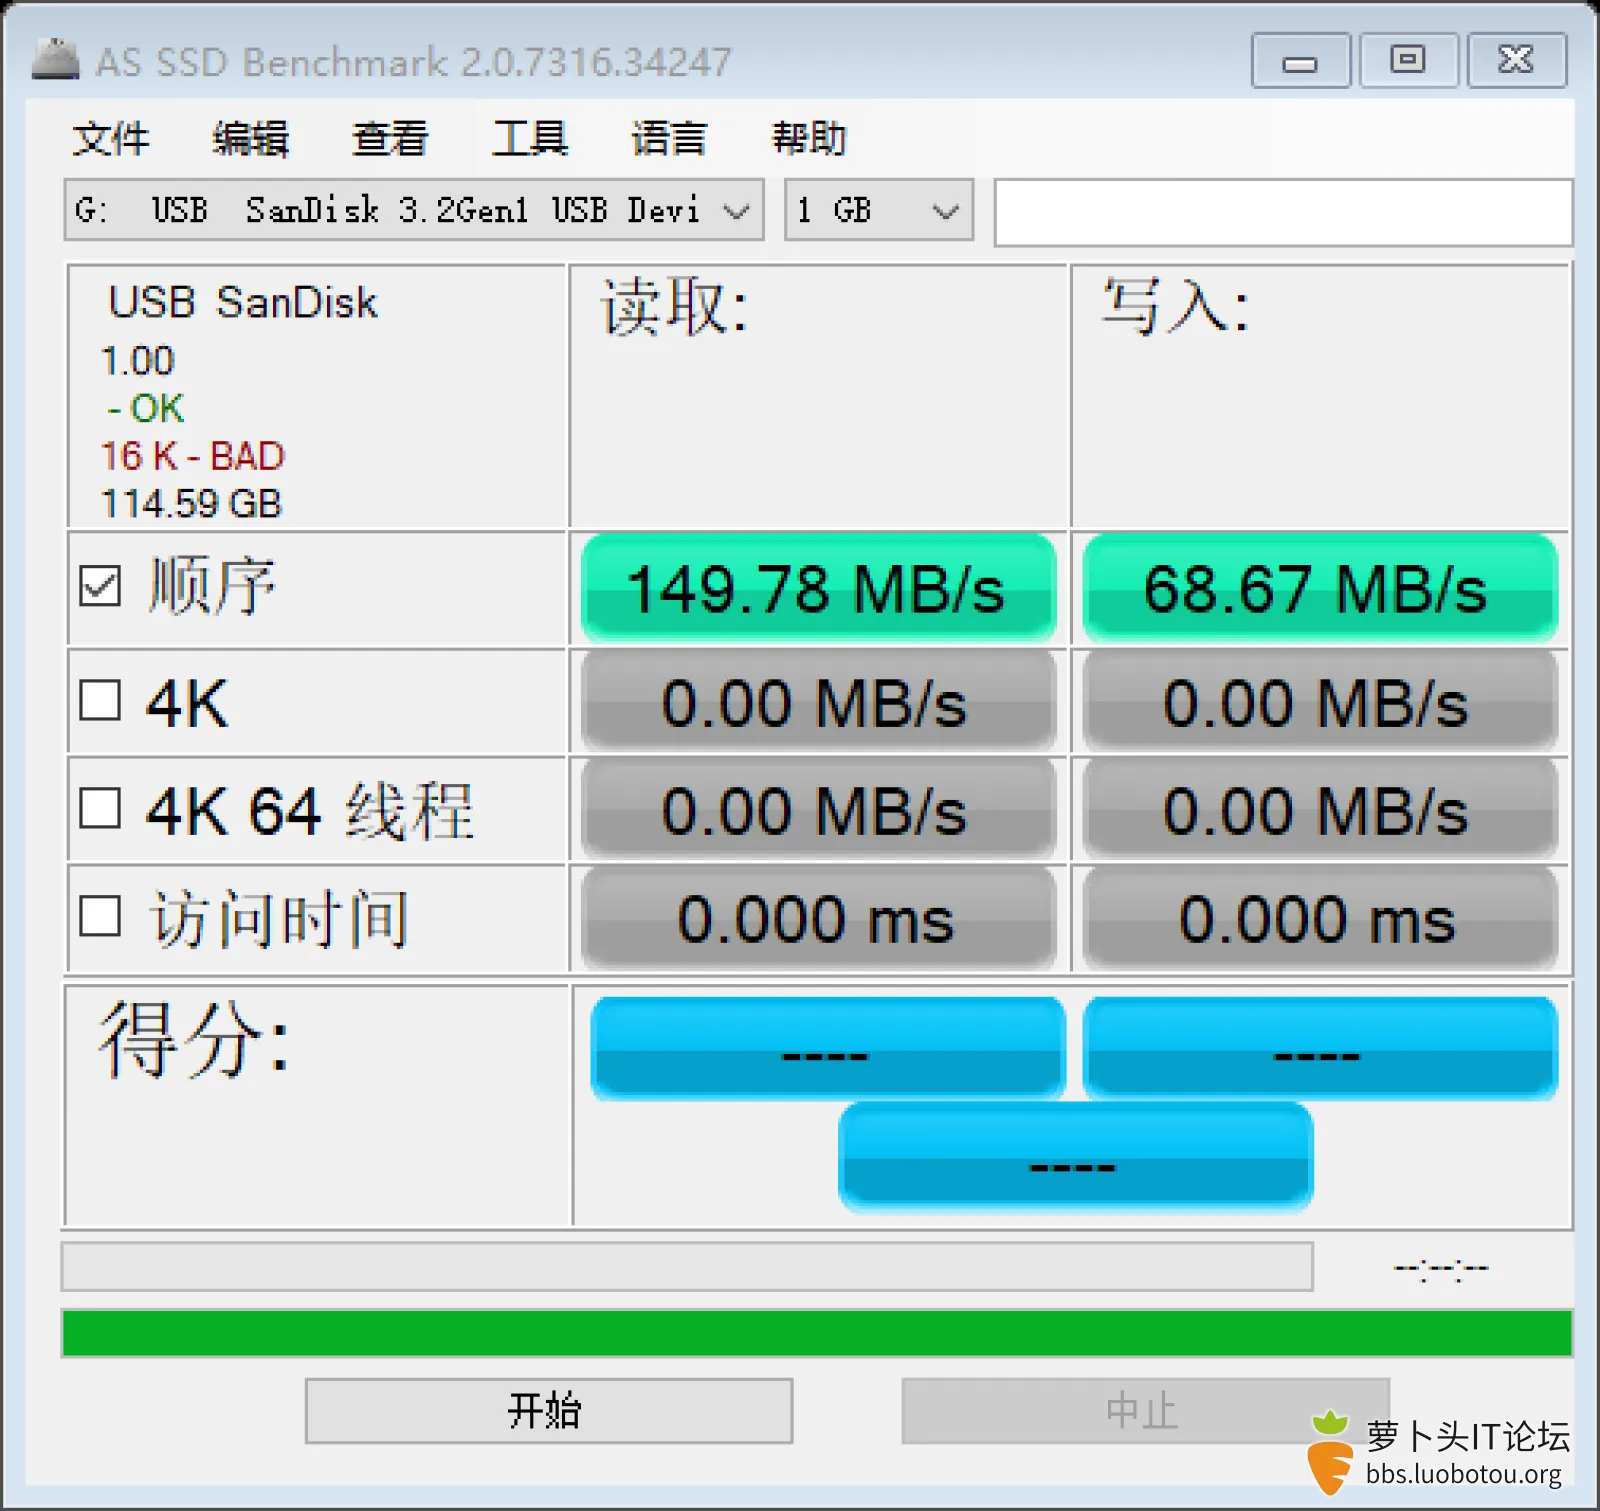 as-ssd-bench  USB  SanDisk 3. 2023.1.4 13-33-40.png